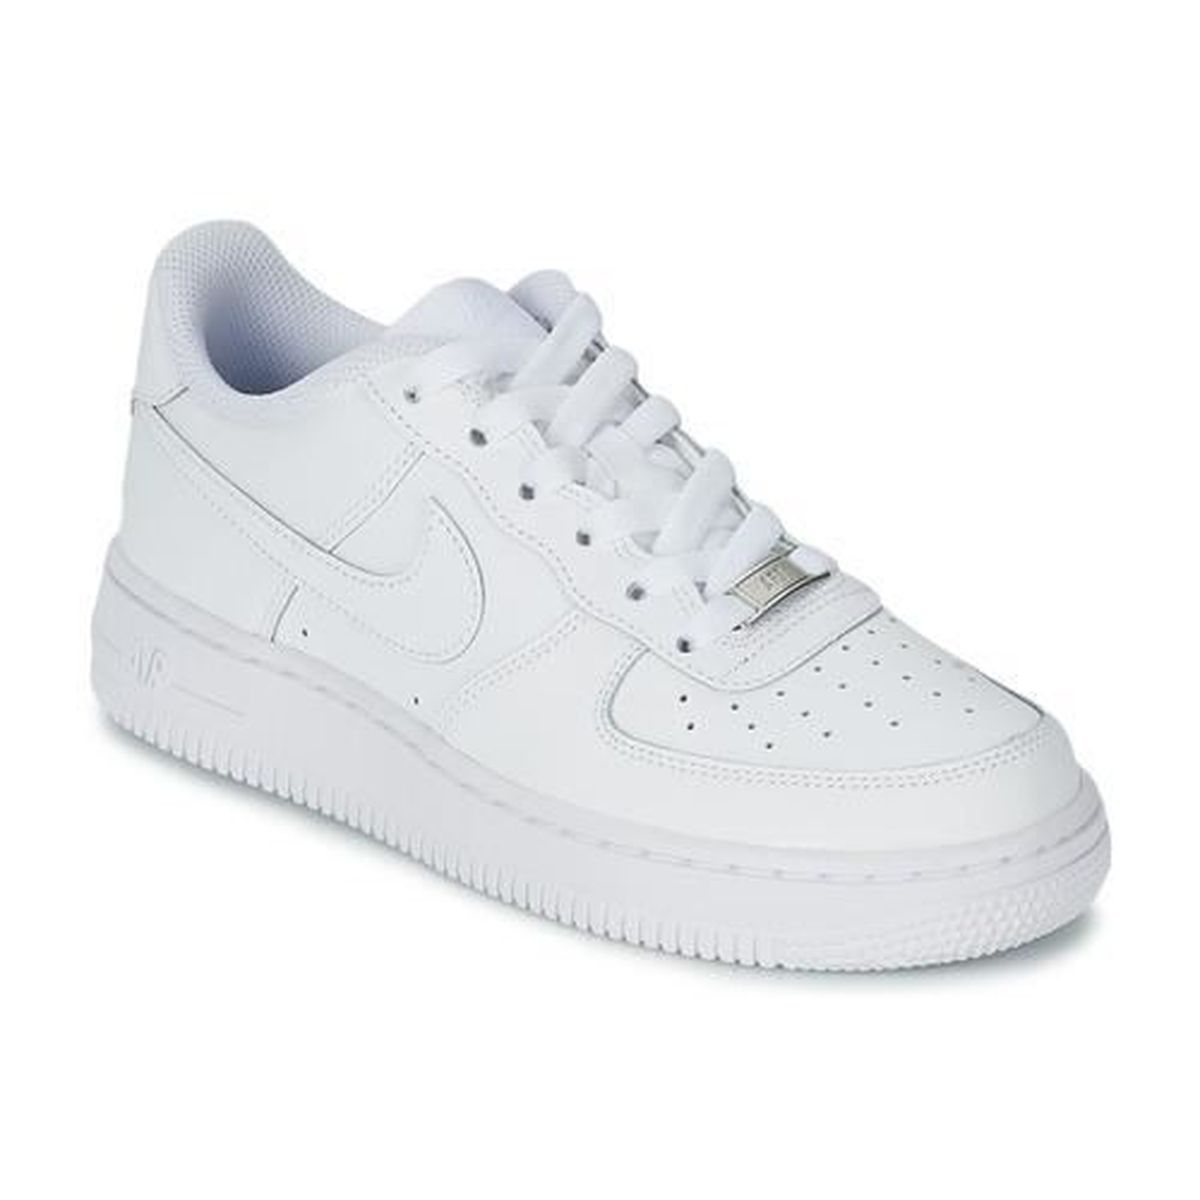 nike air force 1 juste do it